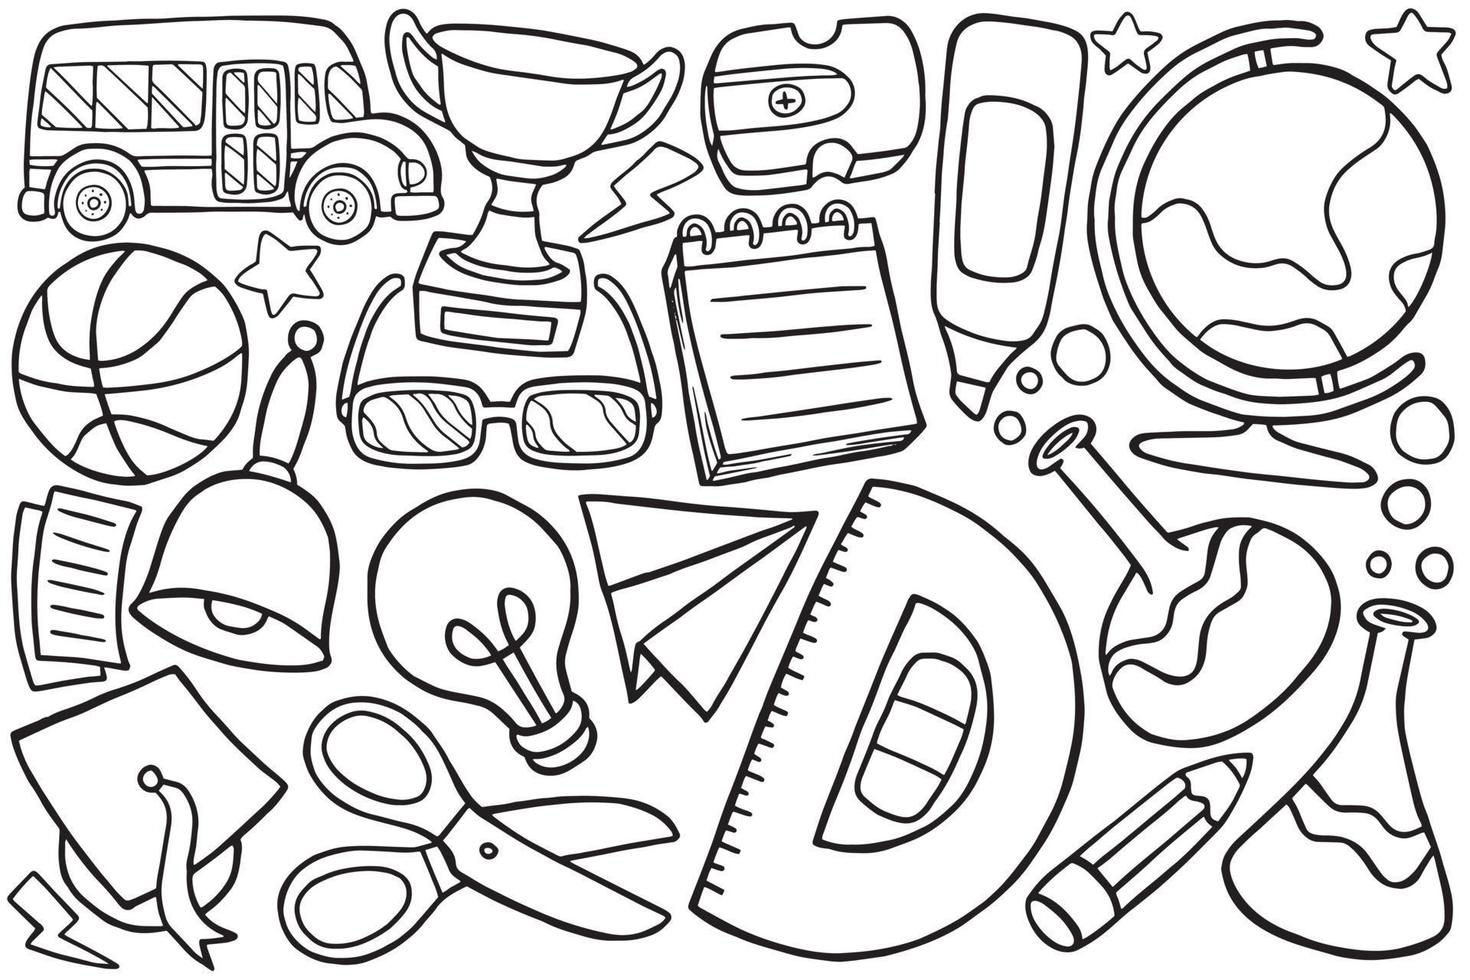 back to school doodle object in cartoon style vector